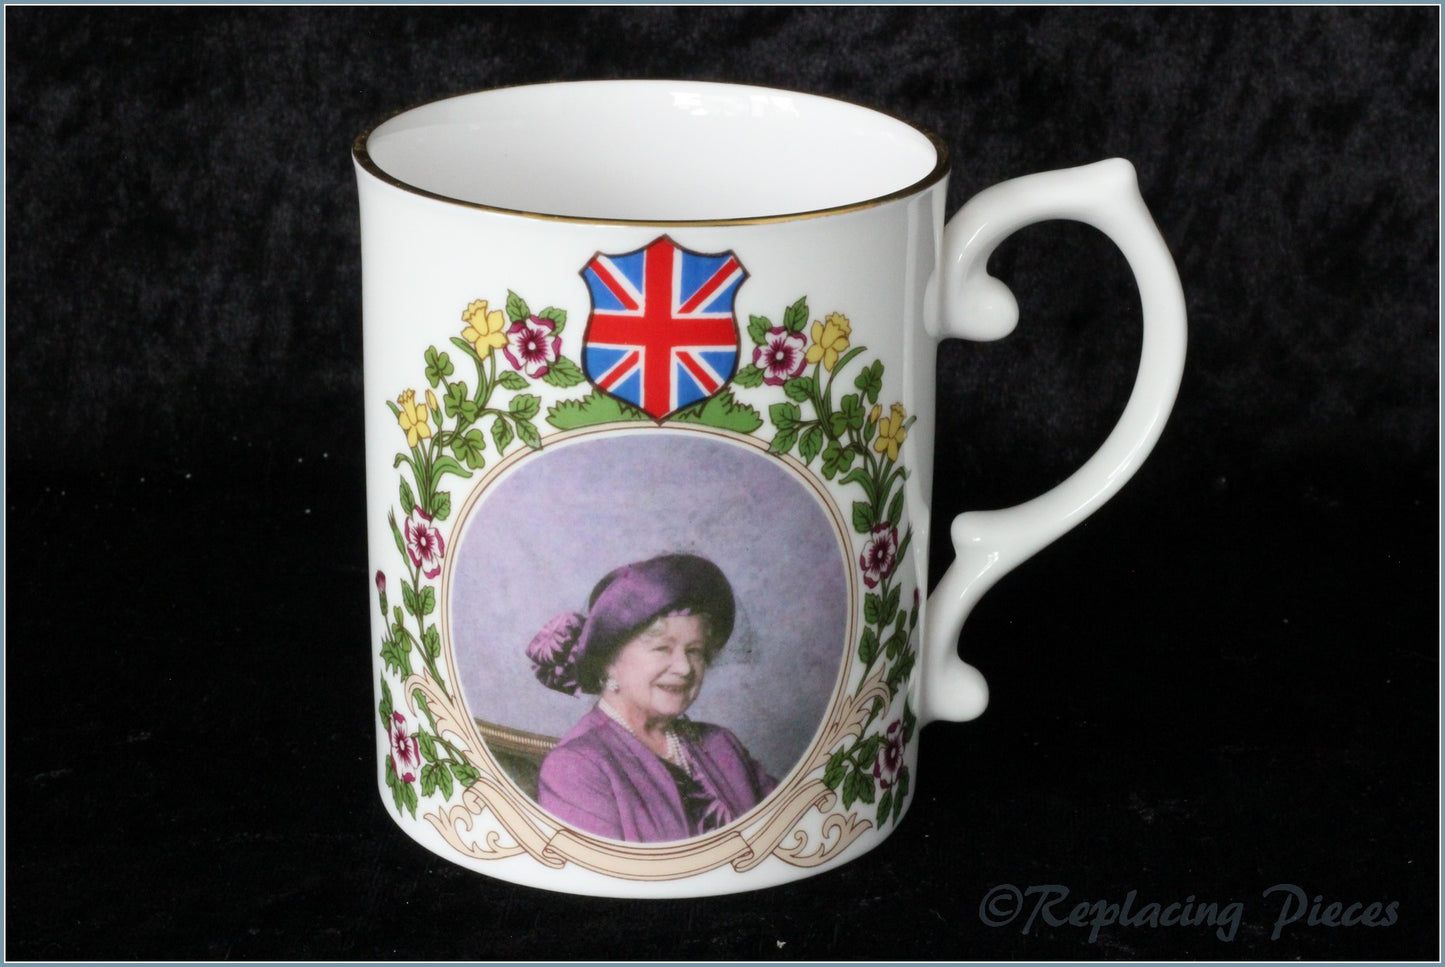 Caverswall - 85th Birthday Of The Queen Mother - Mug